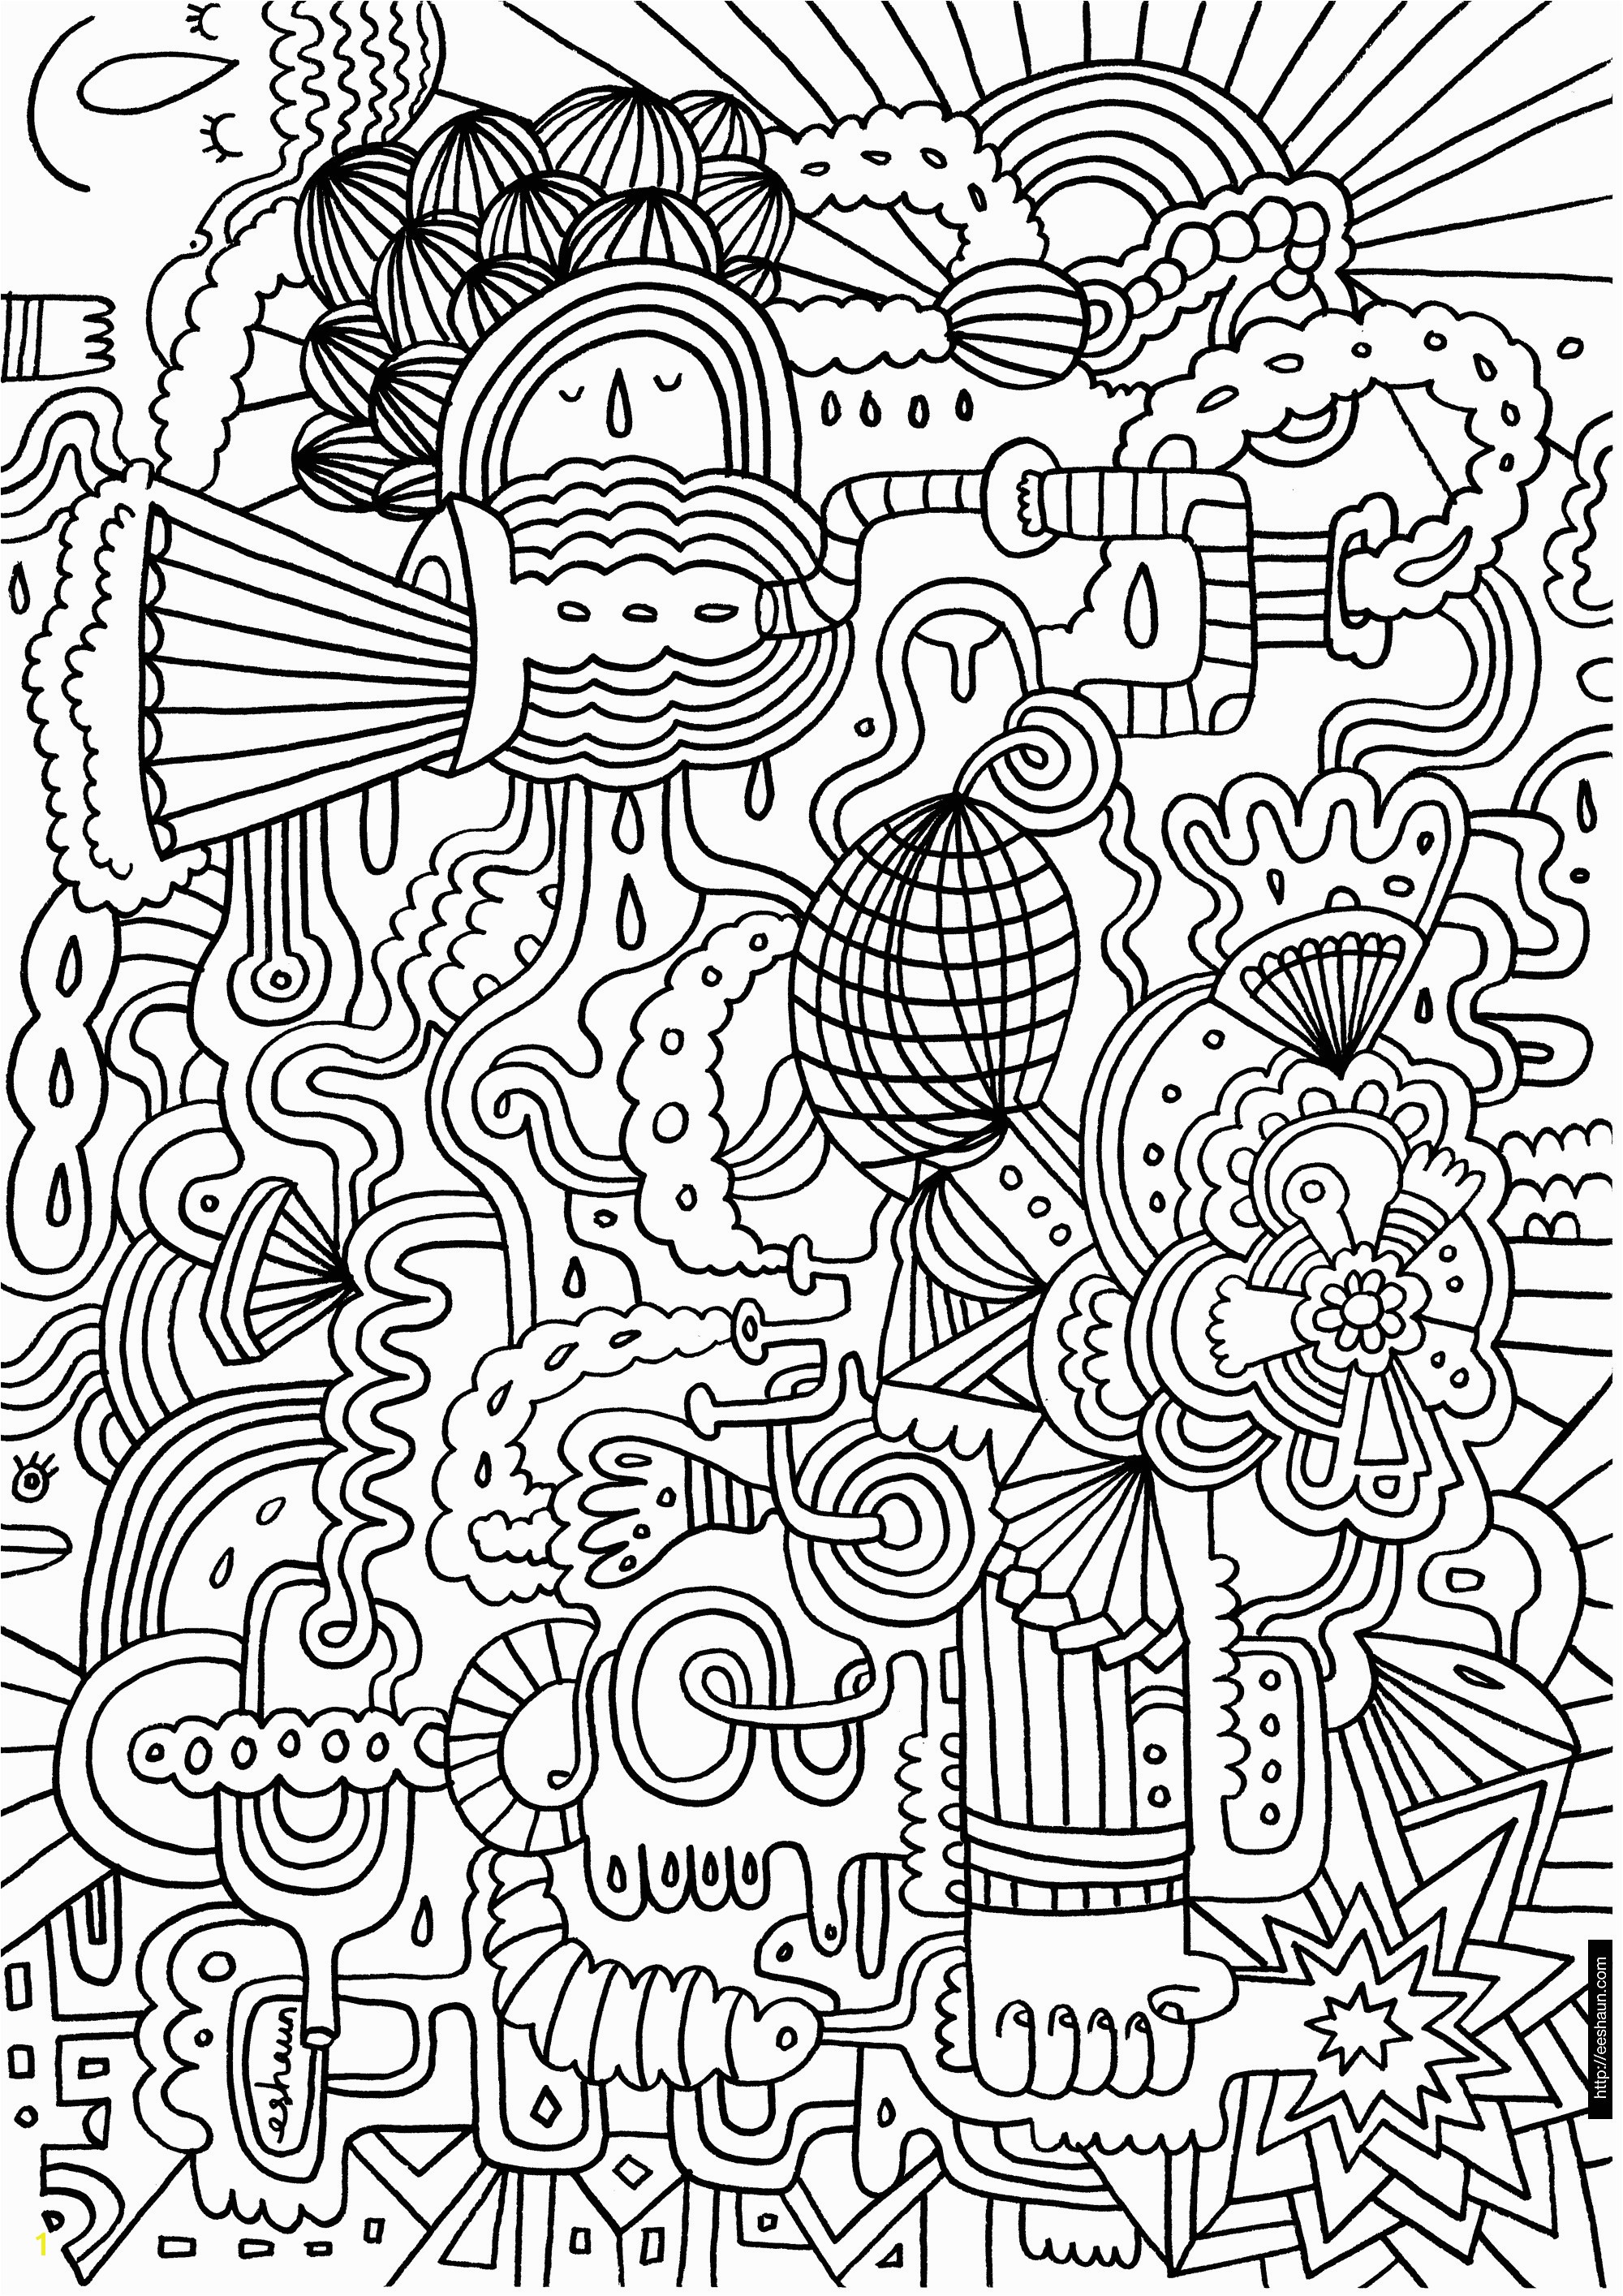 Difficult Coloring Pages Free Free Difficult Coloring Pages Inspirational Best Coloring Page for